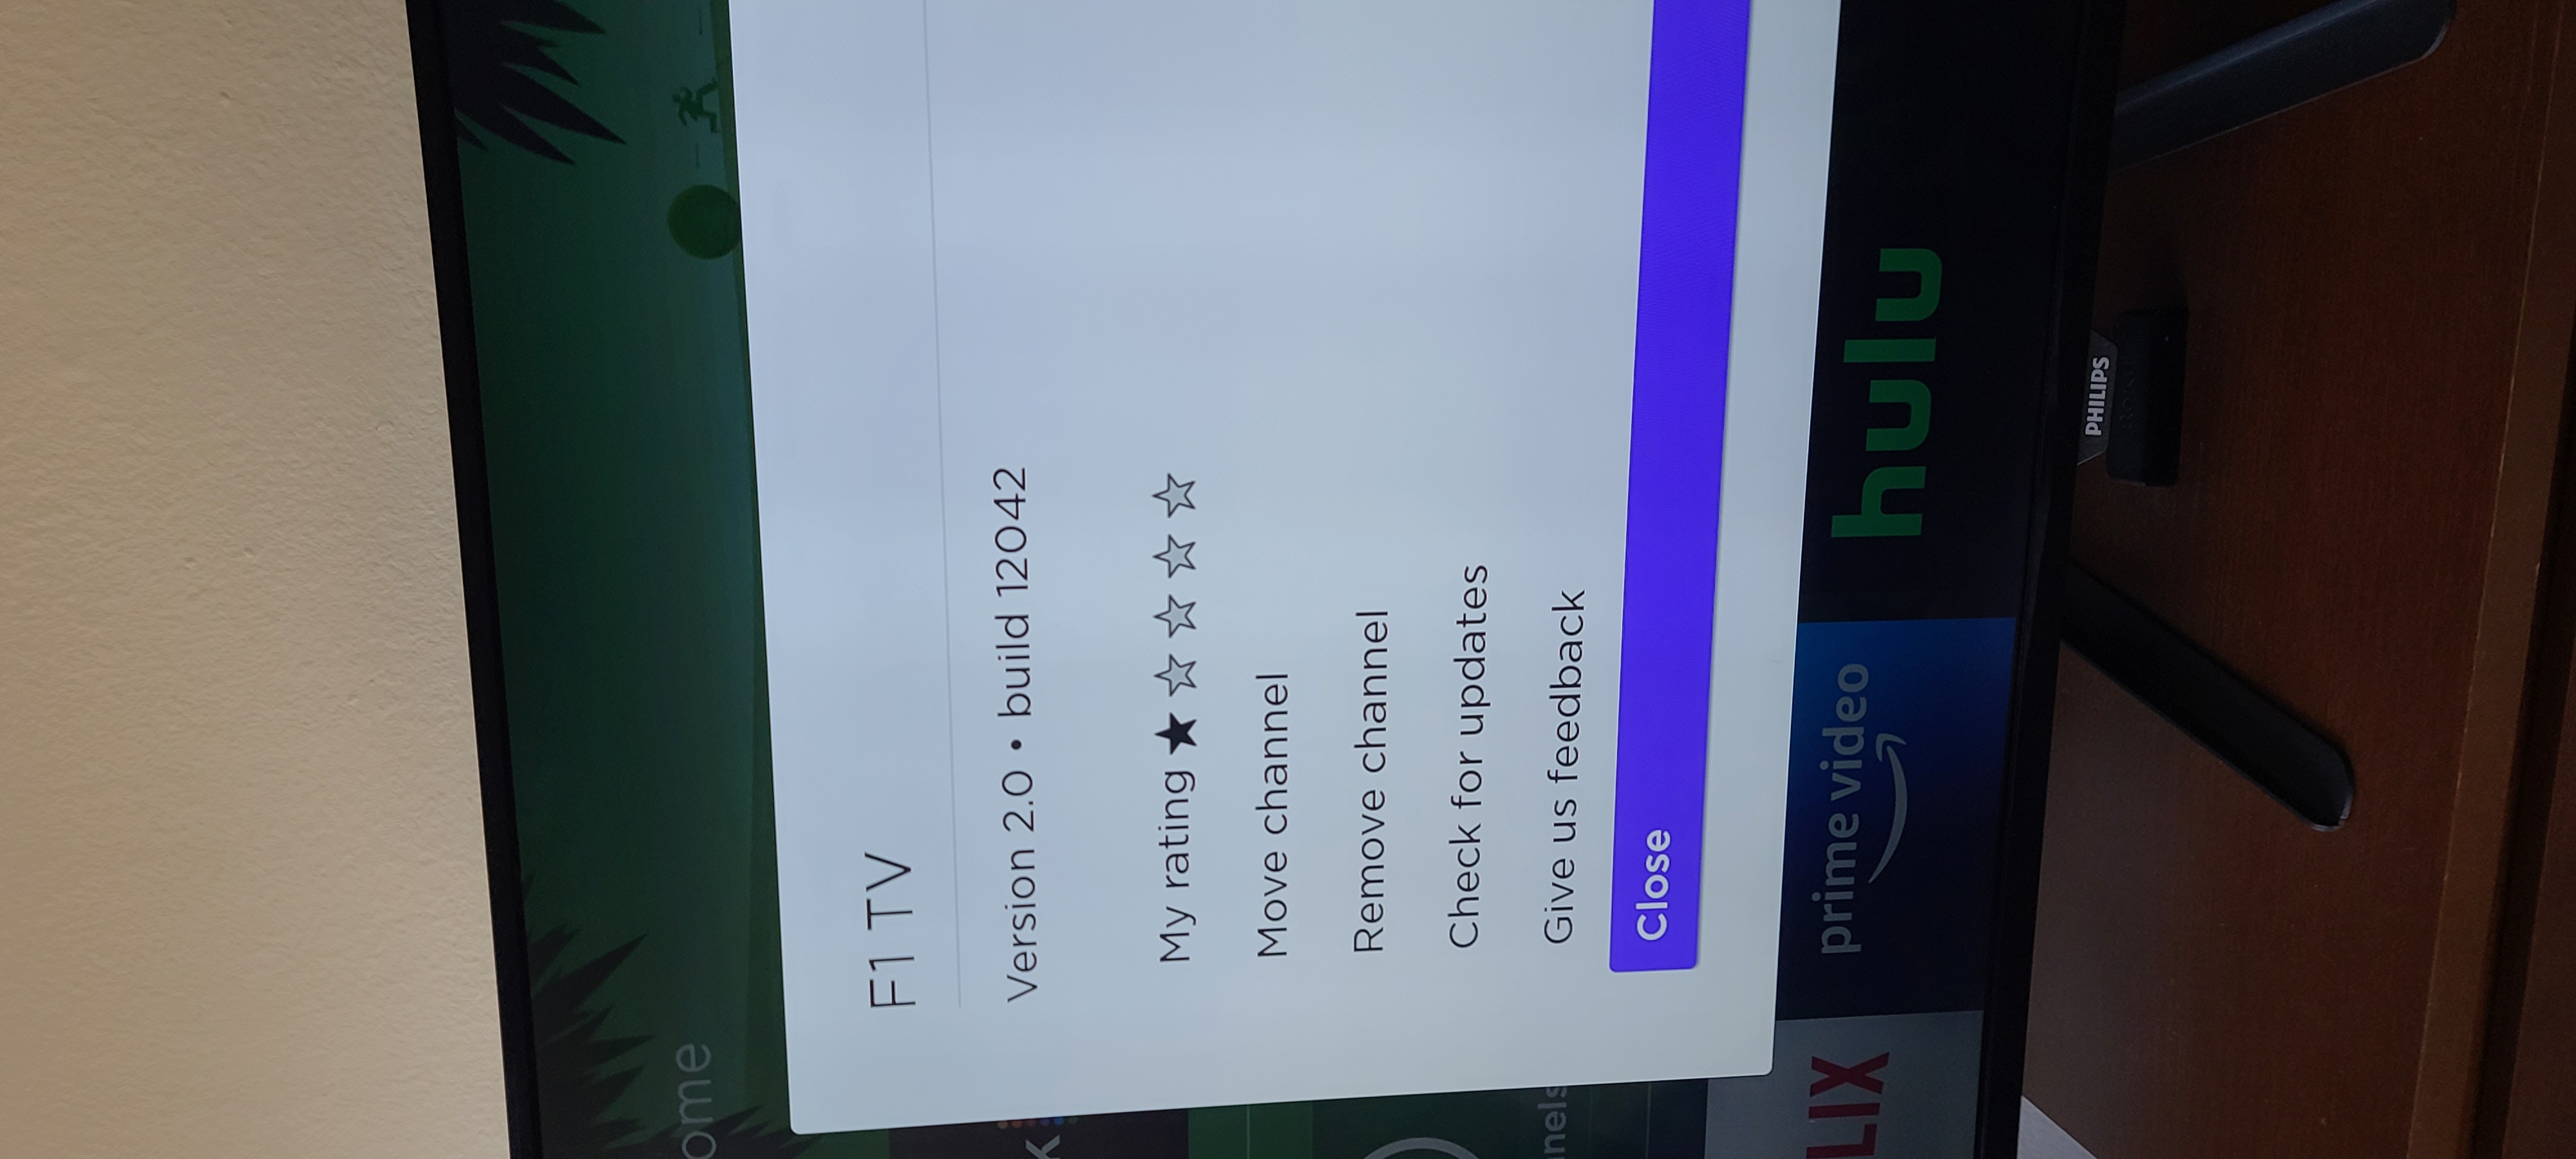 Solved F1 TV - Sign in issues and app not updating